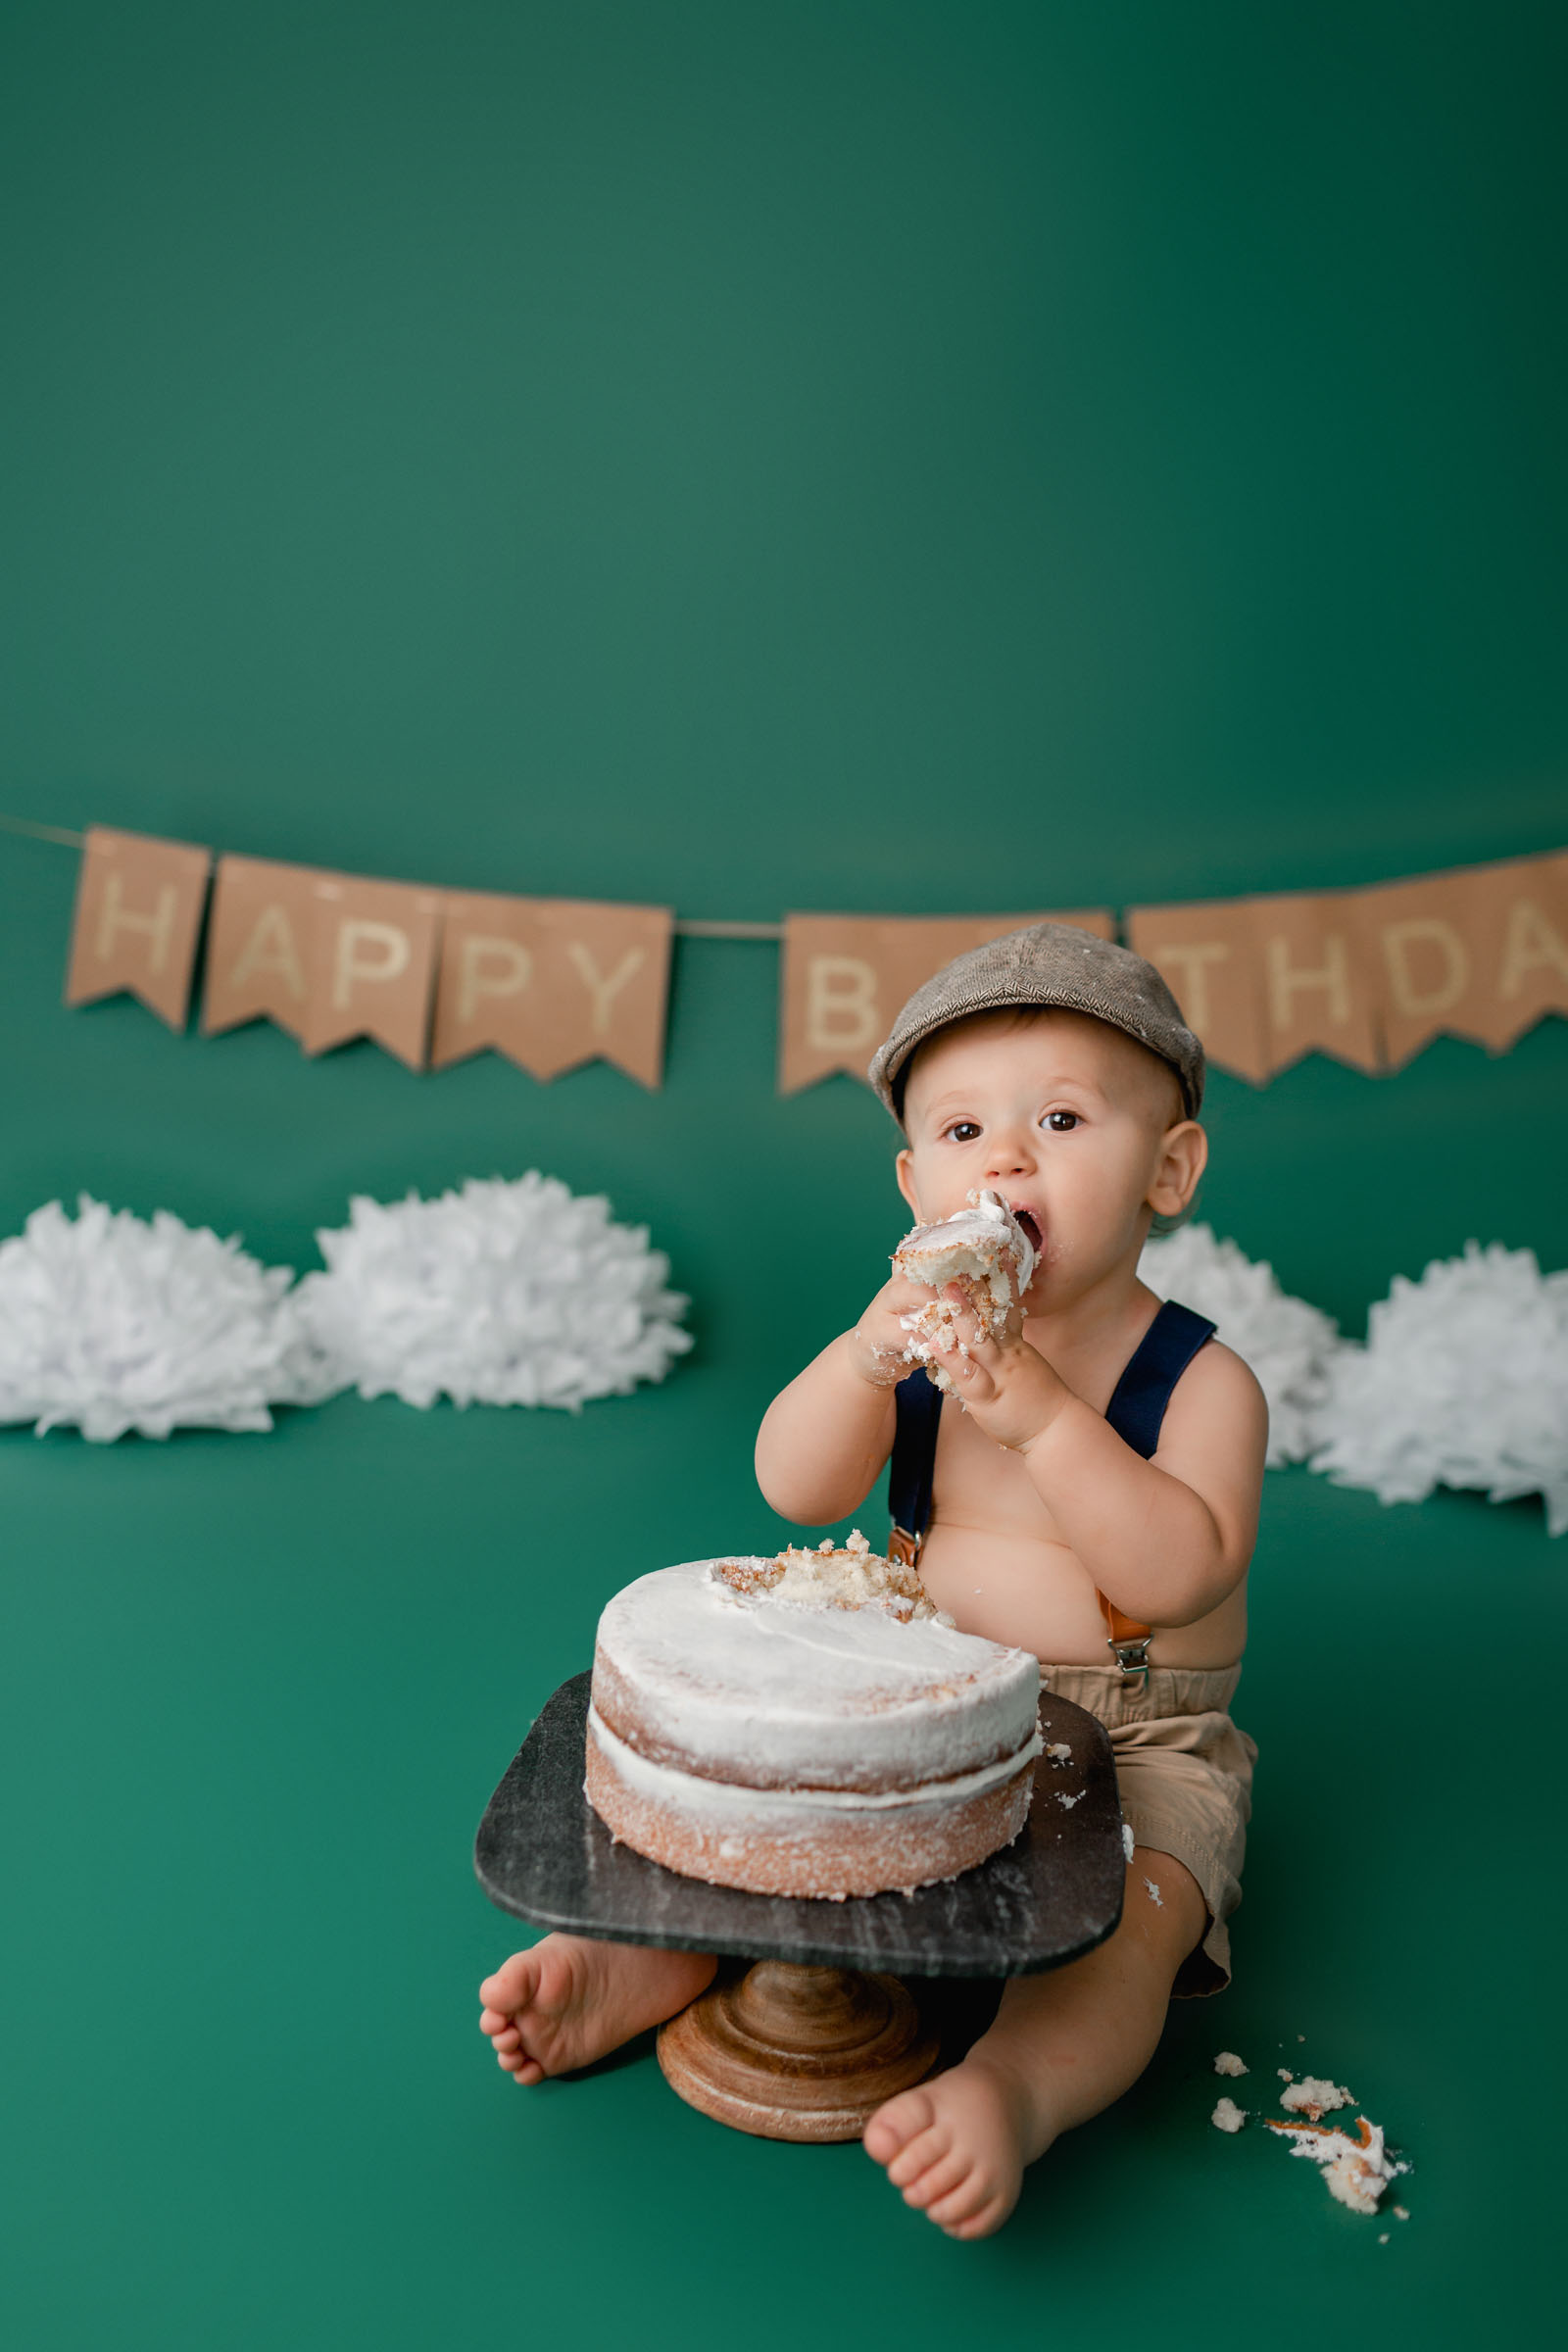 Boy in newspaper hat sitting on green backdrop eating his cake for his cake smash pictures